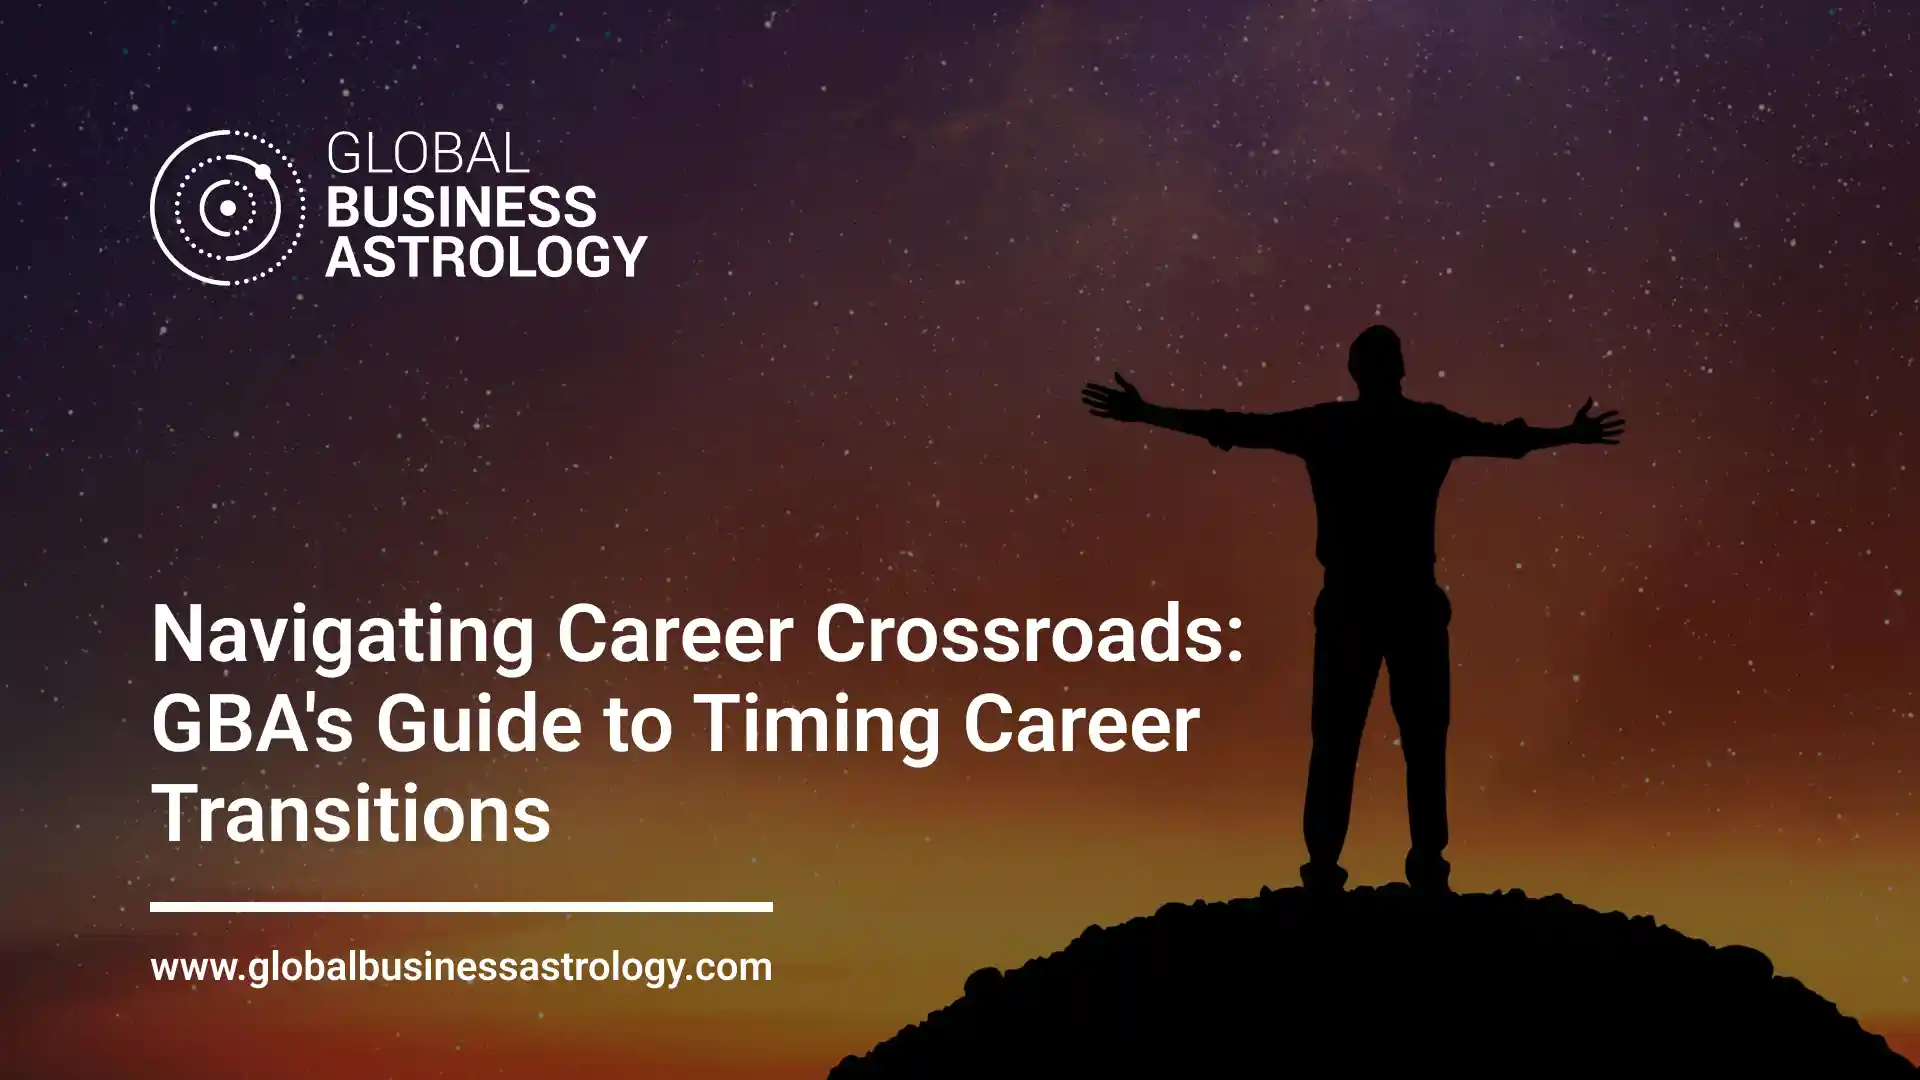 Navigating Career Crossroads: GBA's Guide to Timing Career Transitions